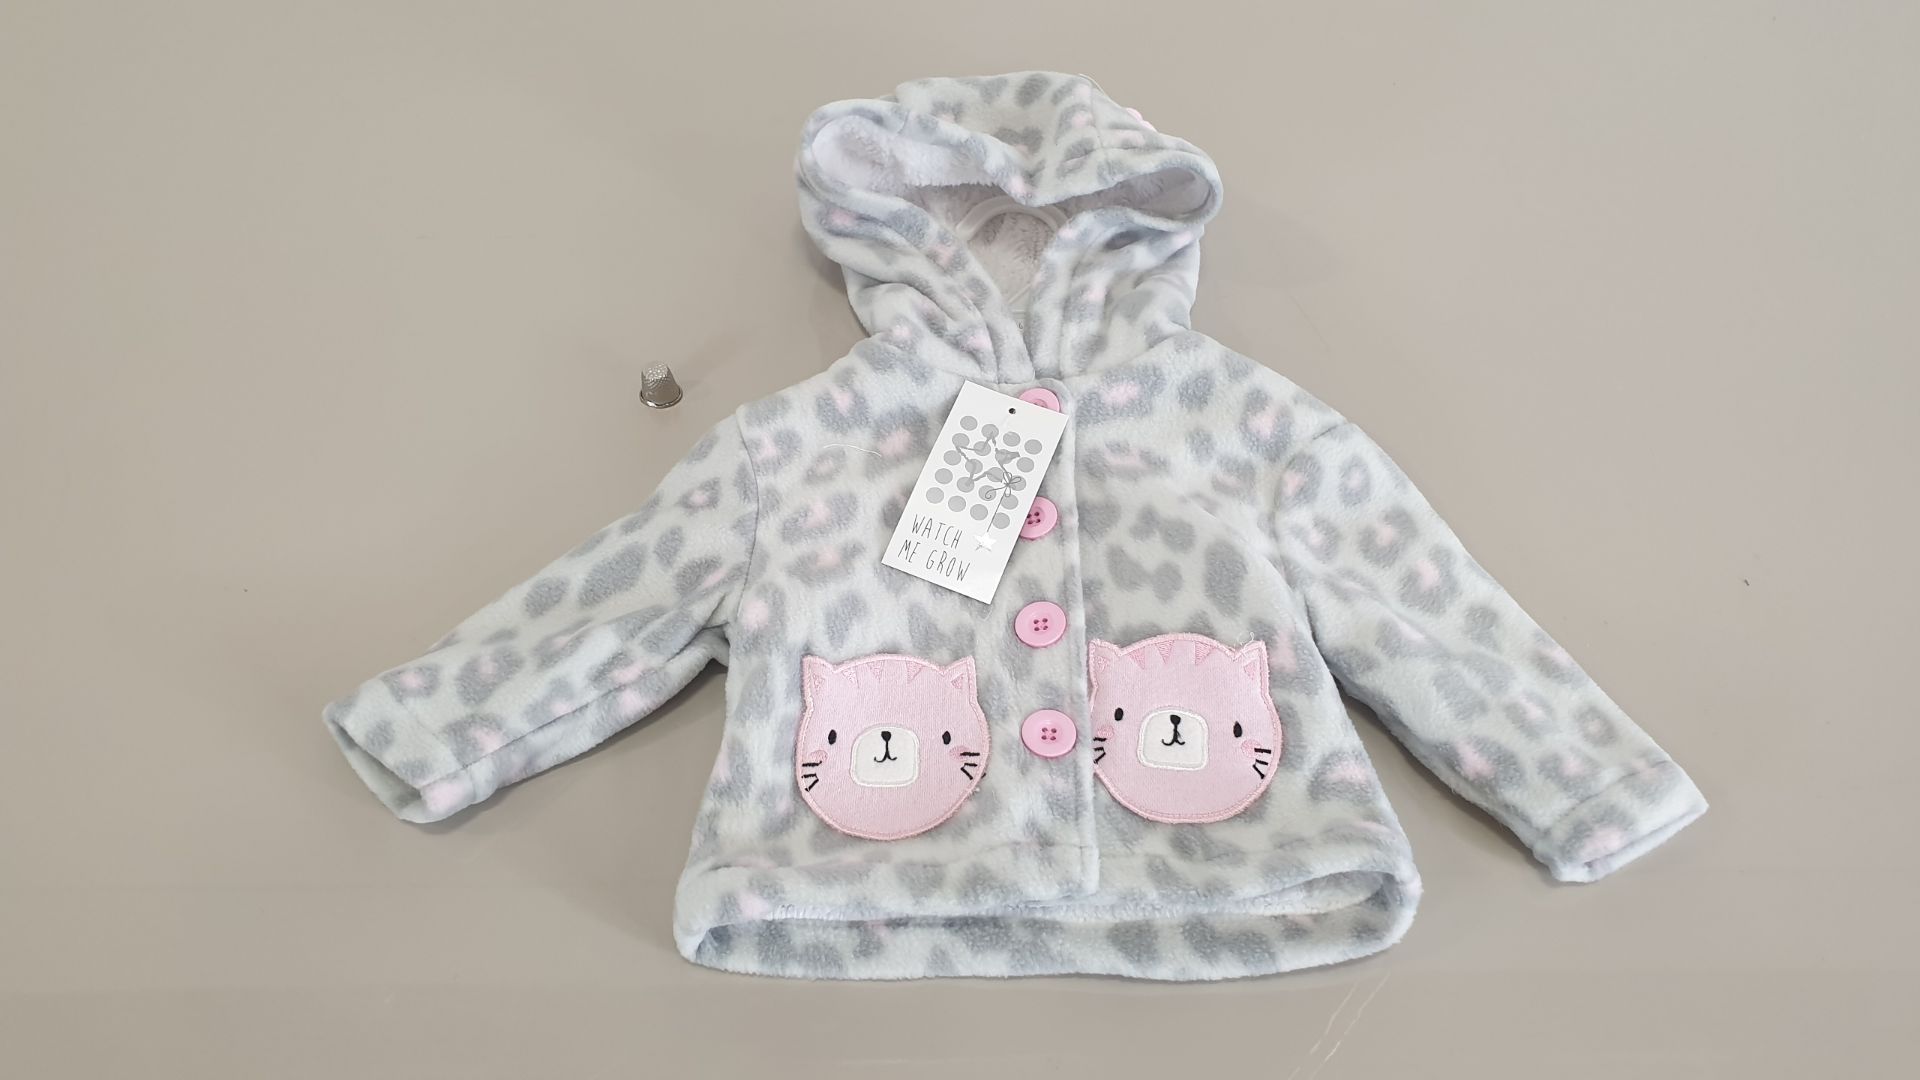 (LOT FOR THURSDAY 28TH MAY AUCTION) 12 X WATCH ME GROW CAT DESIGN HOODIES IN ASSORTED SIZES 3-12